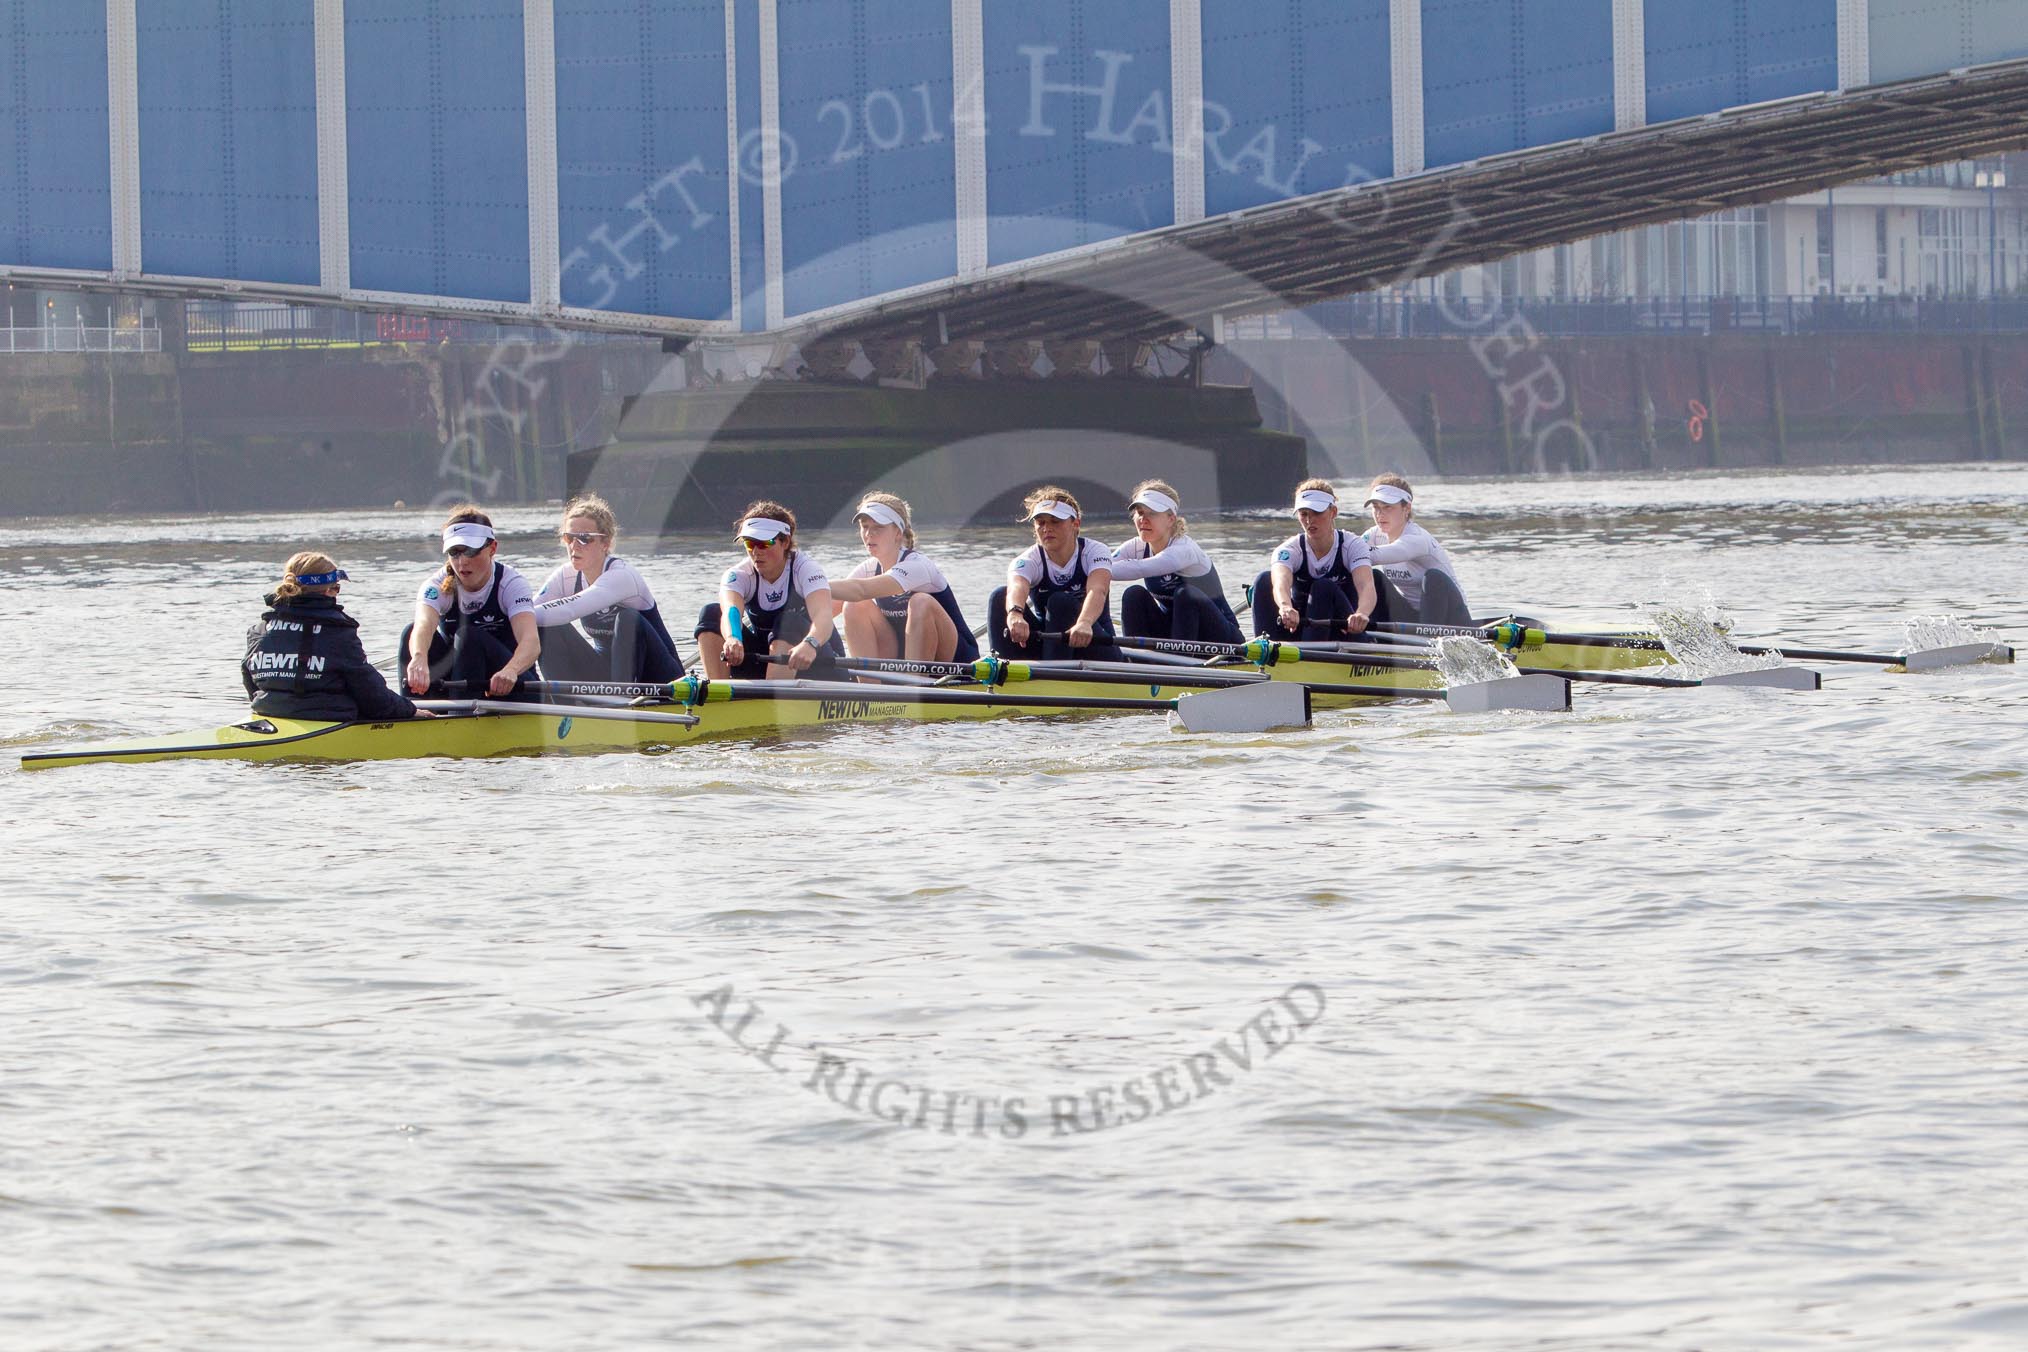 The Boat Race season 2014 - fixture OUWBC vs Molesey BC.




on 01 March 2014 at 12:31, image #51